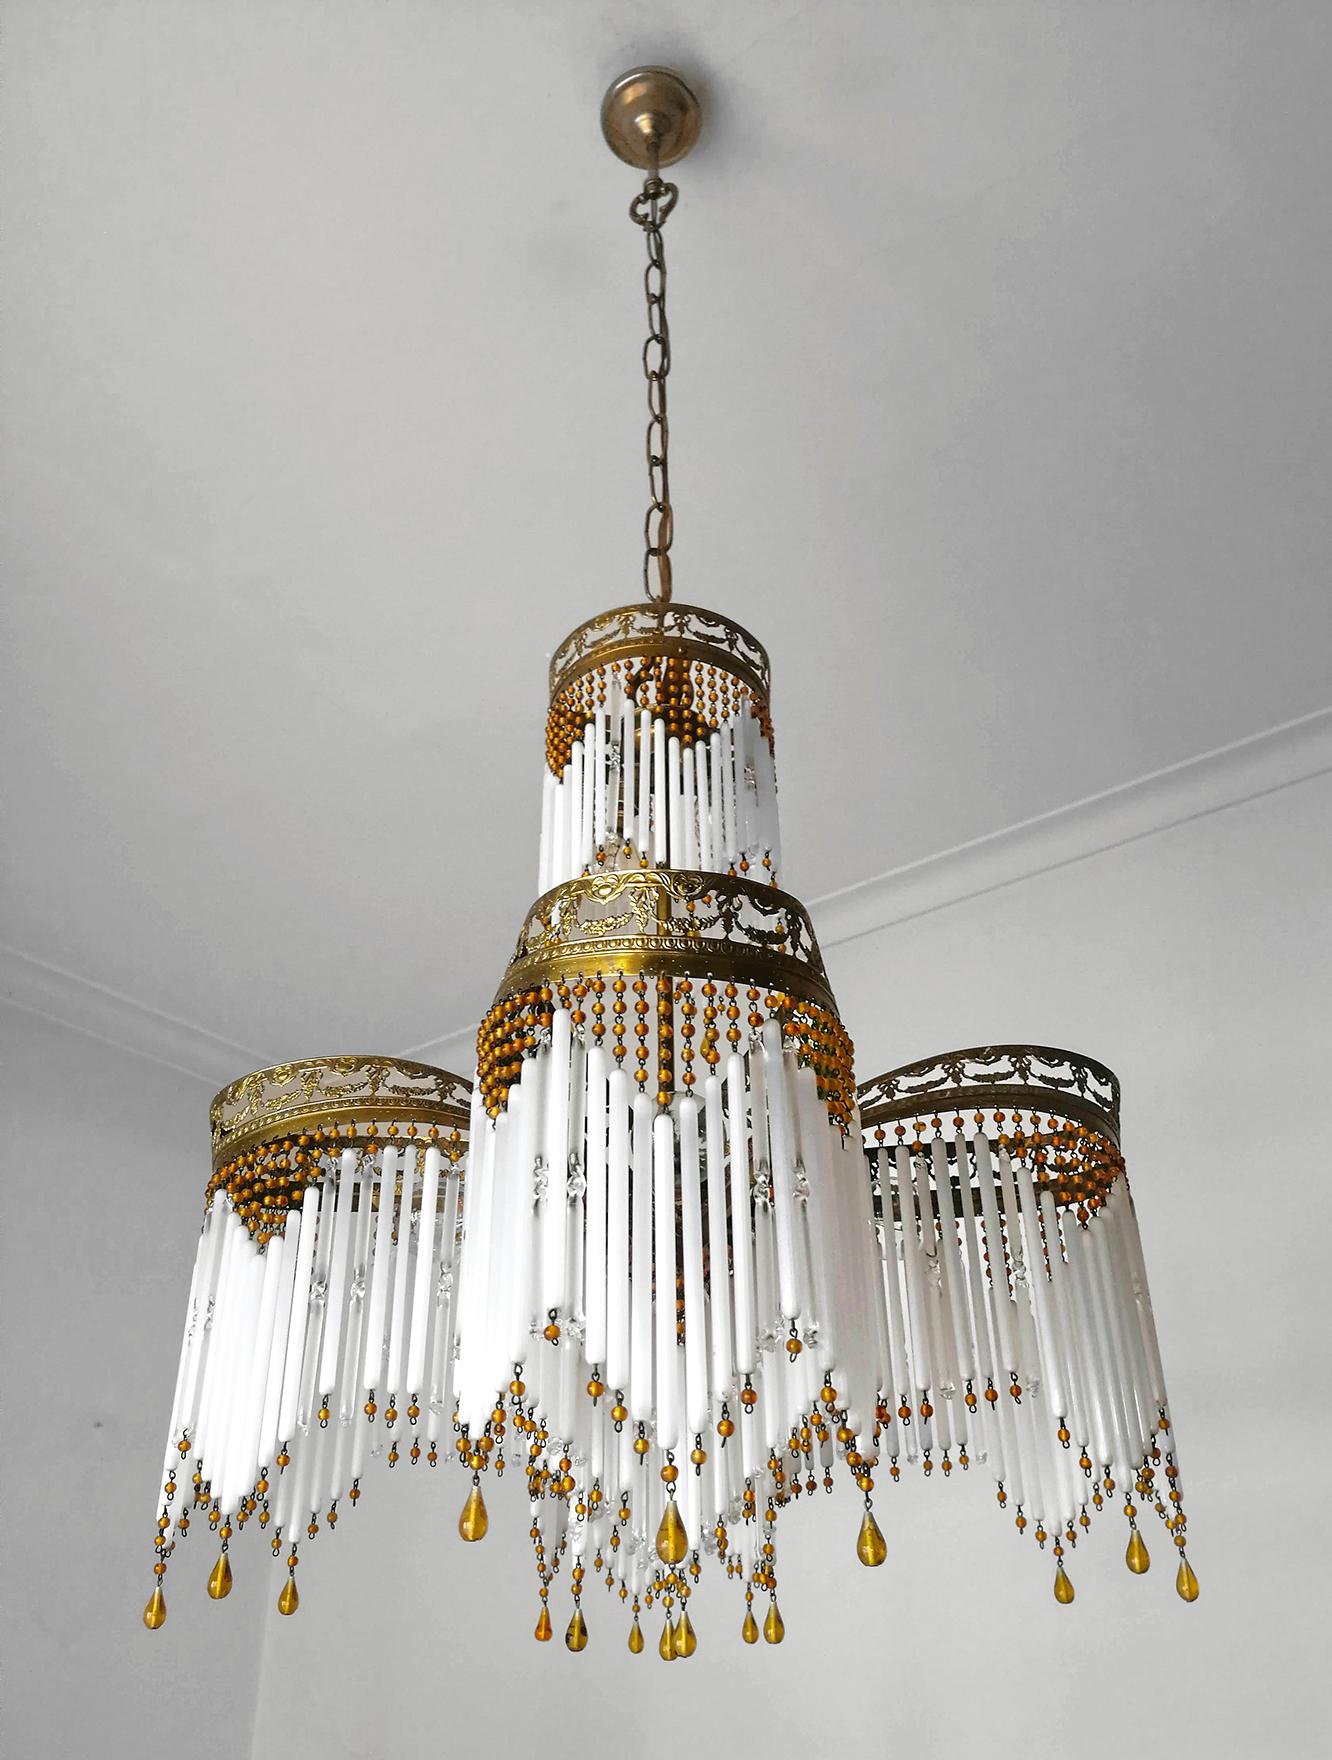 French Art Deco Art Nouveau Amber Beaded Crystal Fringe & Gilt Ornate Chandelier In Good Condition For Sale In Coimbra, PT